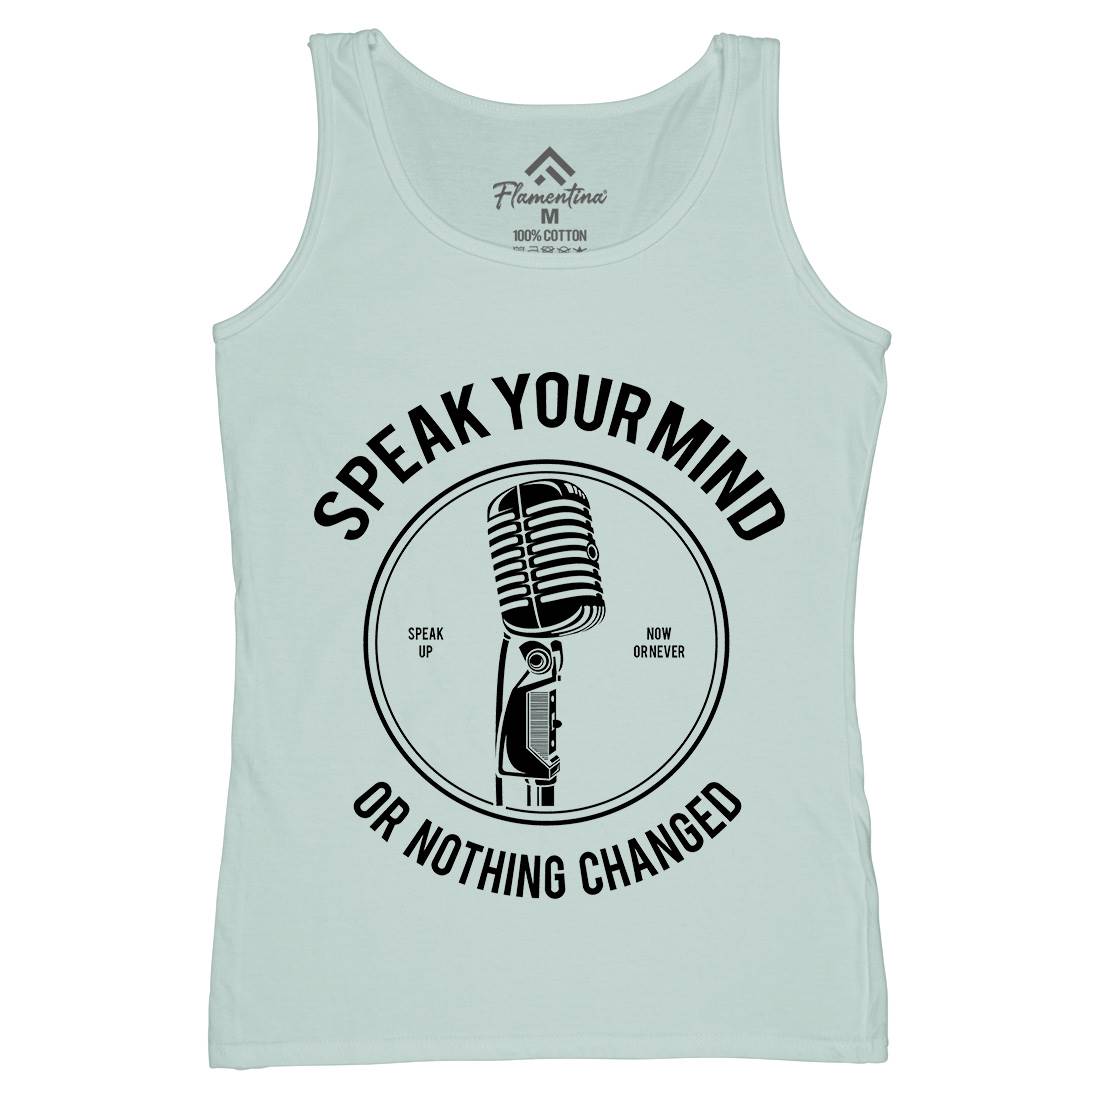 Speak Your Mind Womens Organic Tank Top Vest Quotes A152